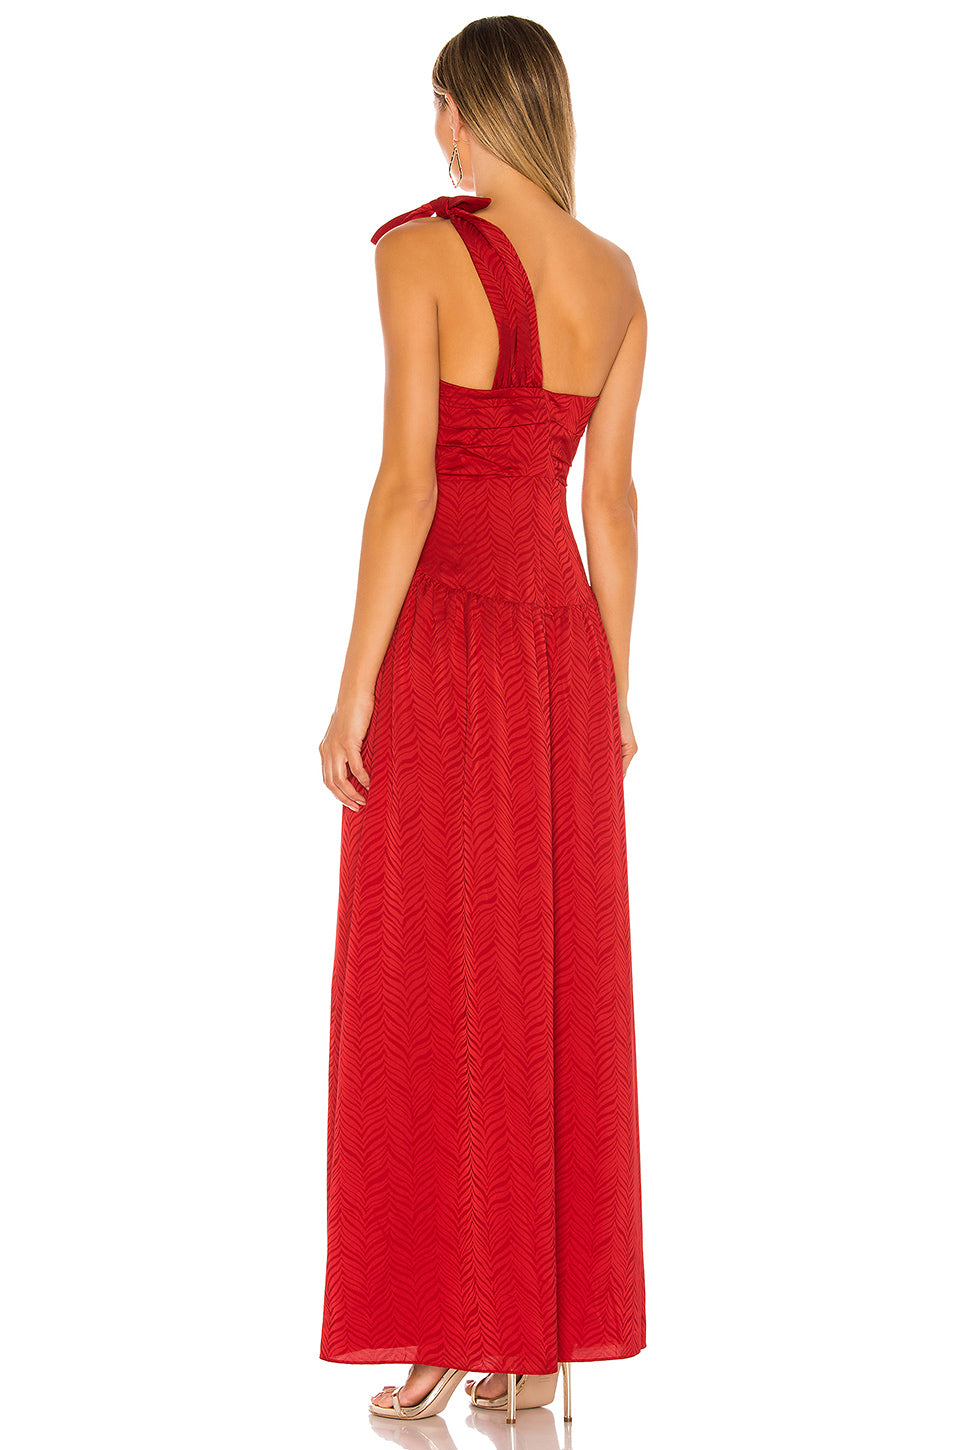 Phoebe Dress in RED